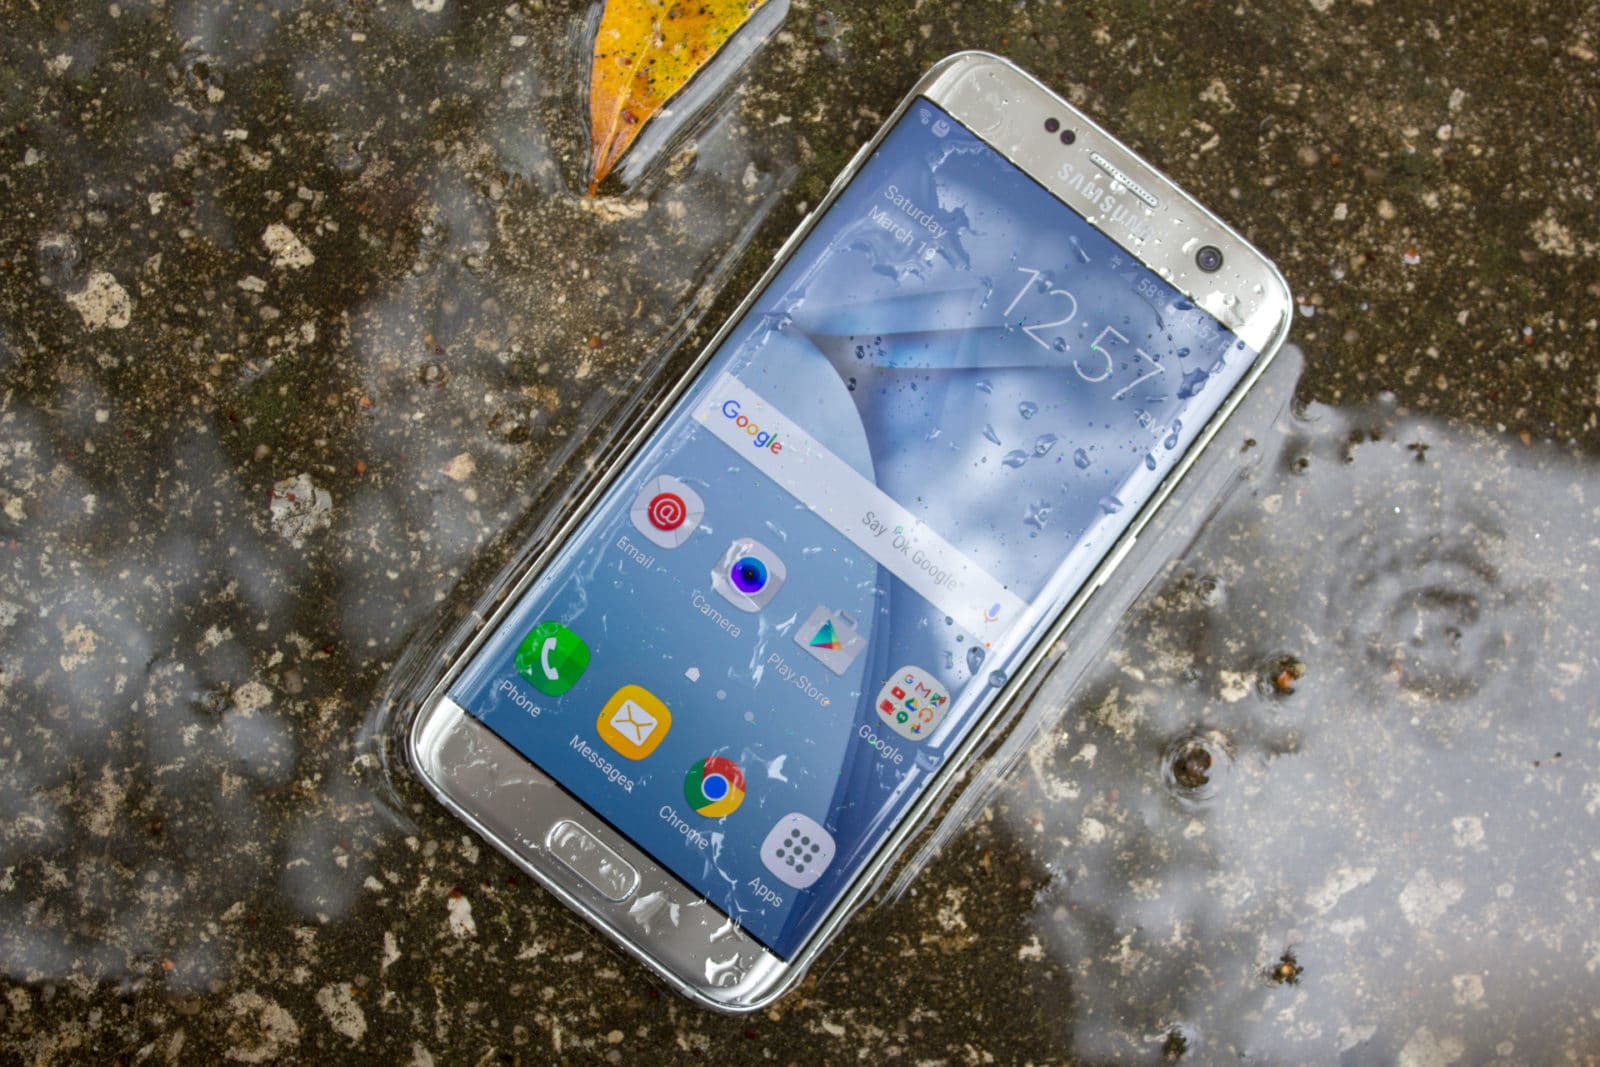 Things to Do If Your Galaxy Smartphone Gets Wet